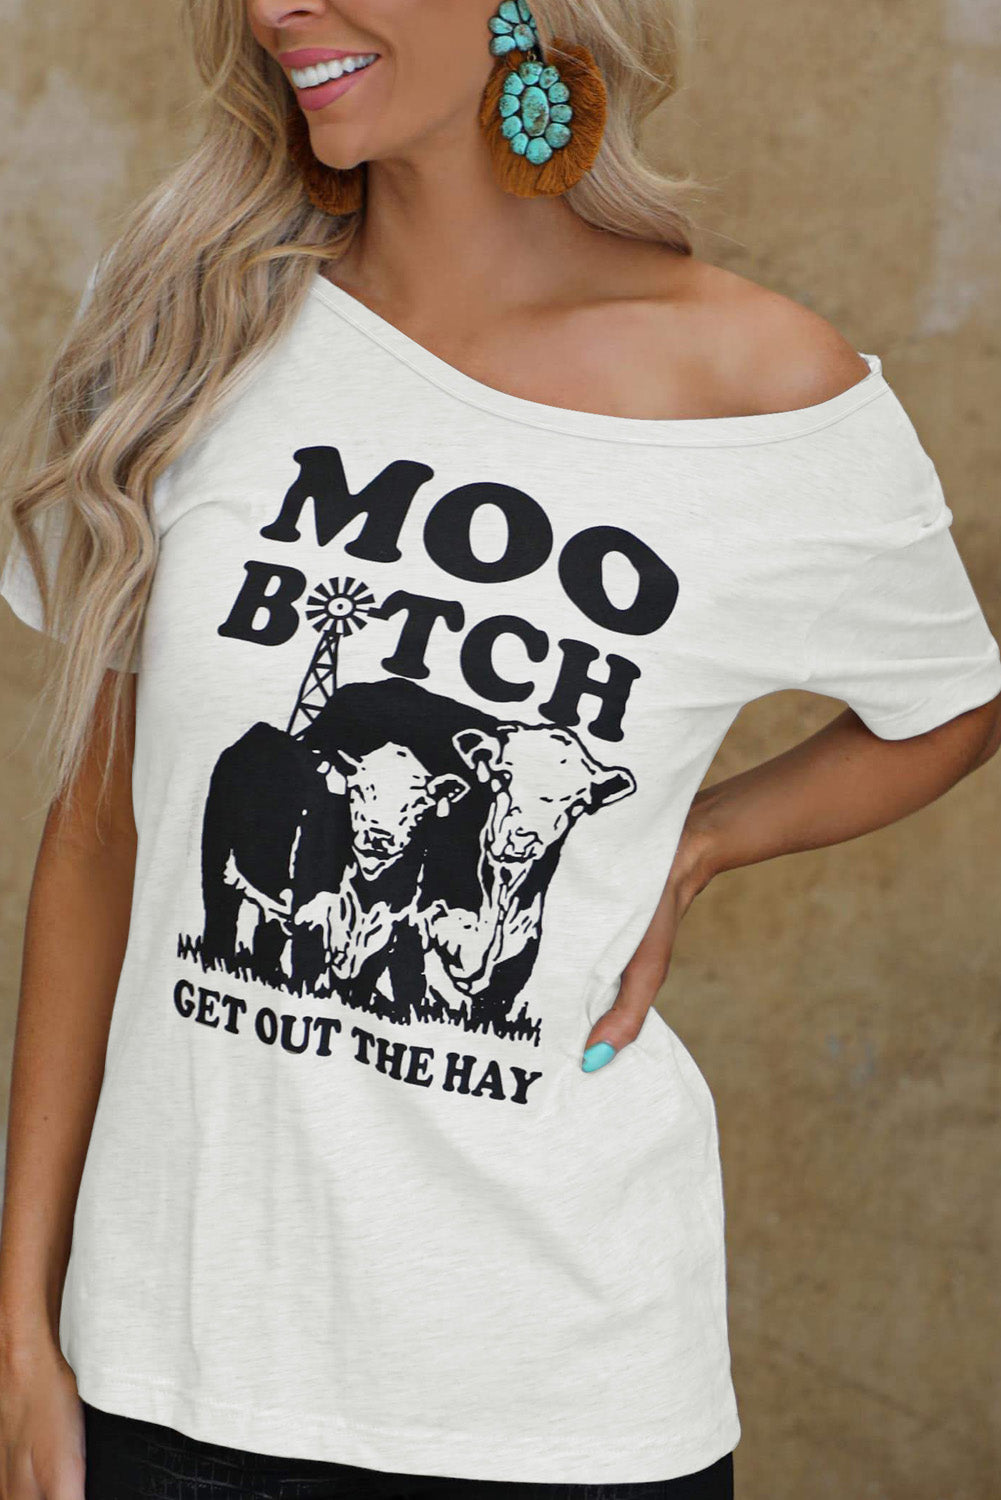 Moo BITCH Get Out The Hay Graphic Tee